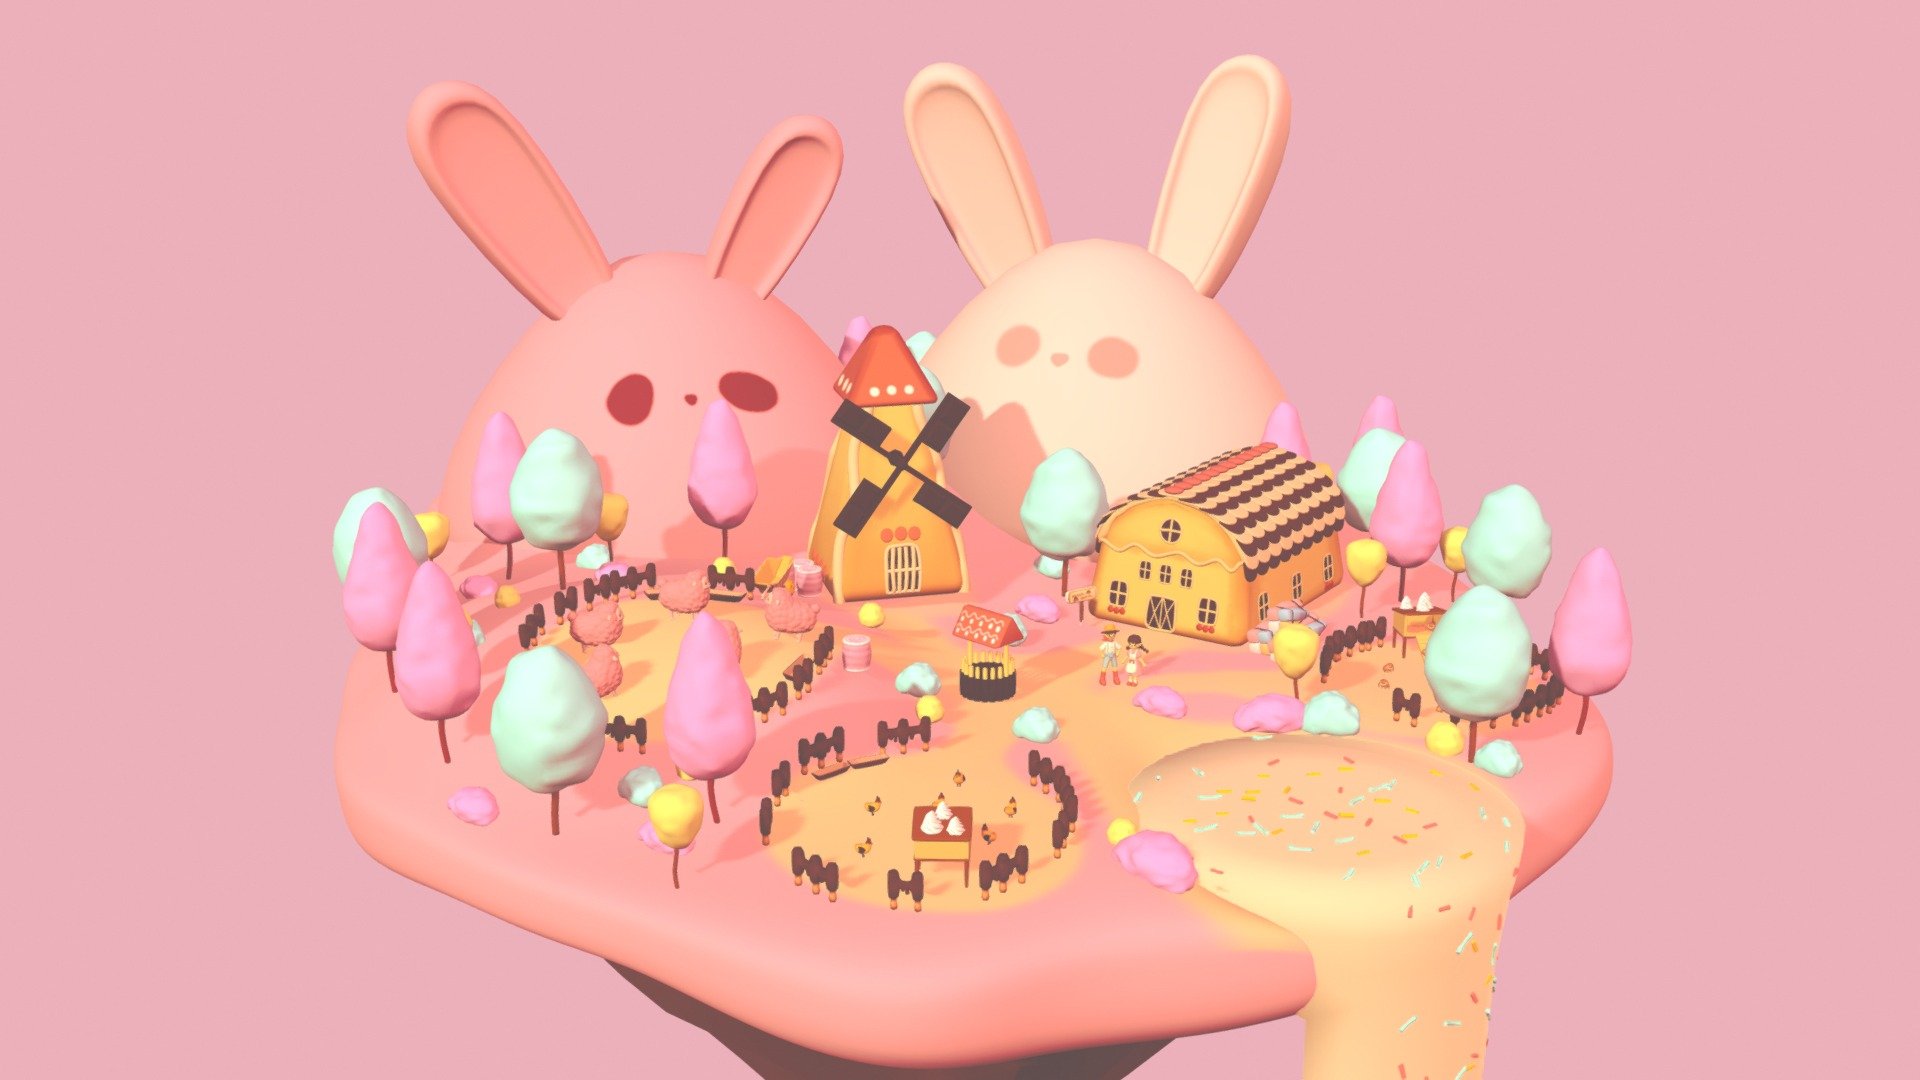 inspired from hansel&amp;gratel

final project for mag62-212 3d modeling with my team - pink candy farm🍬 - 3D model by shipykocomputer (@nattawara.s) 3d model